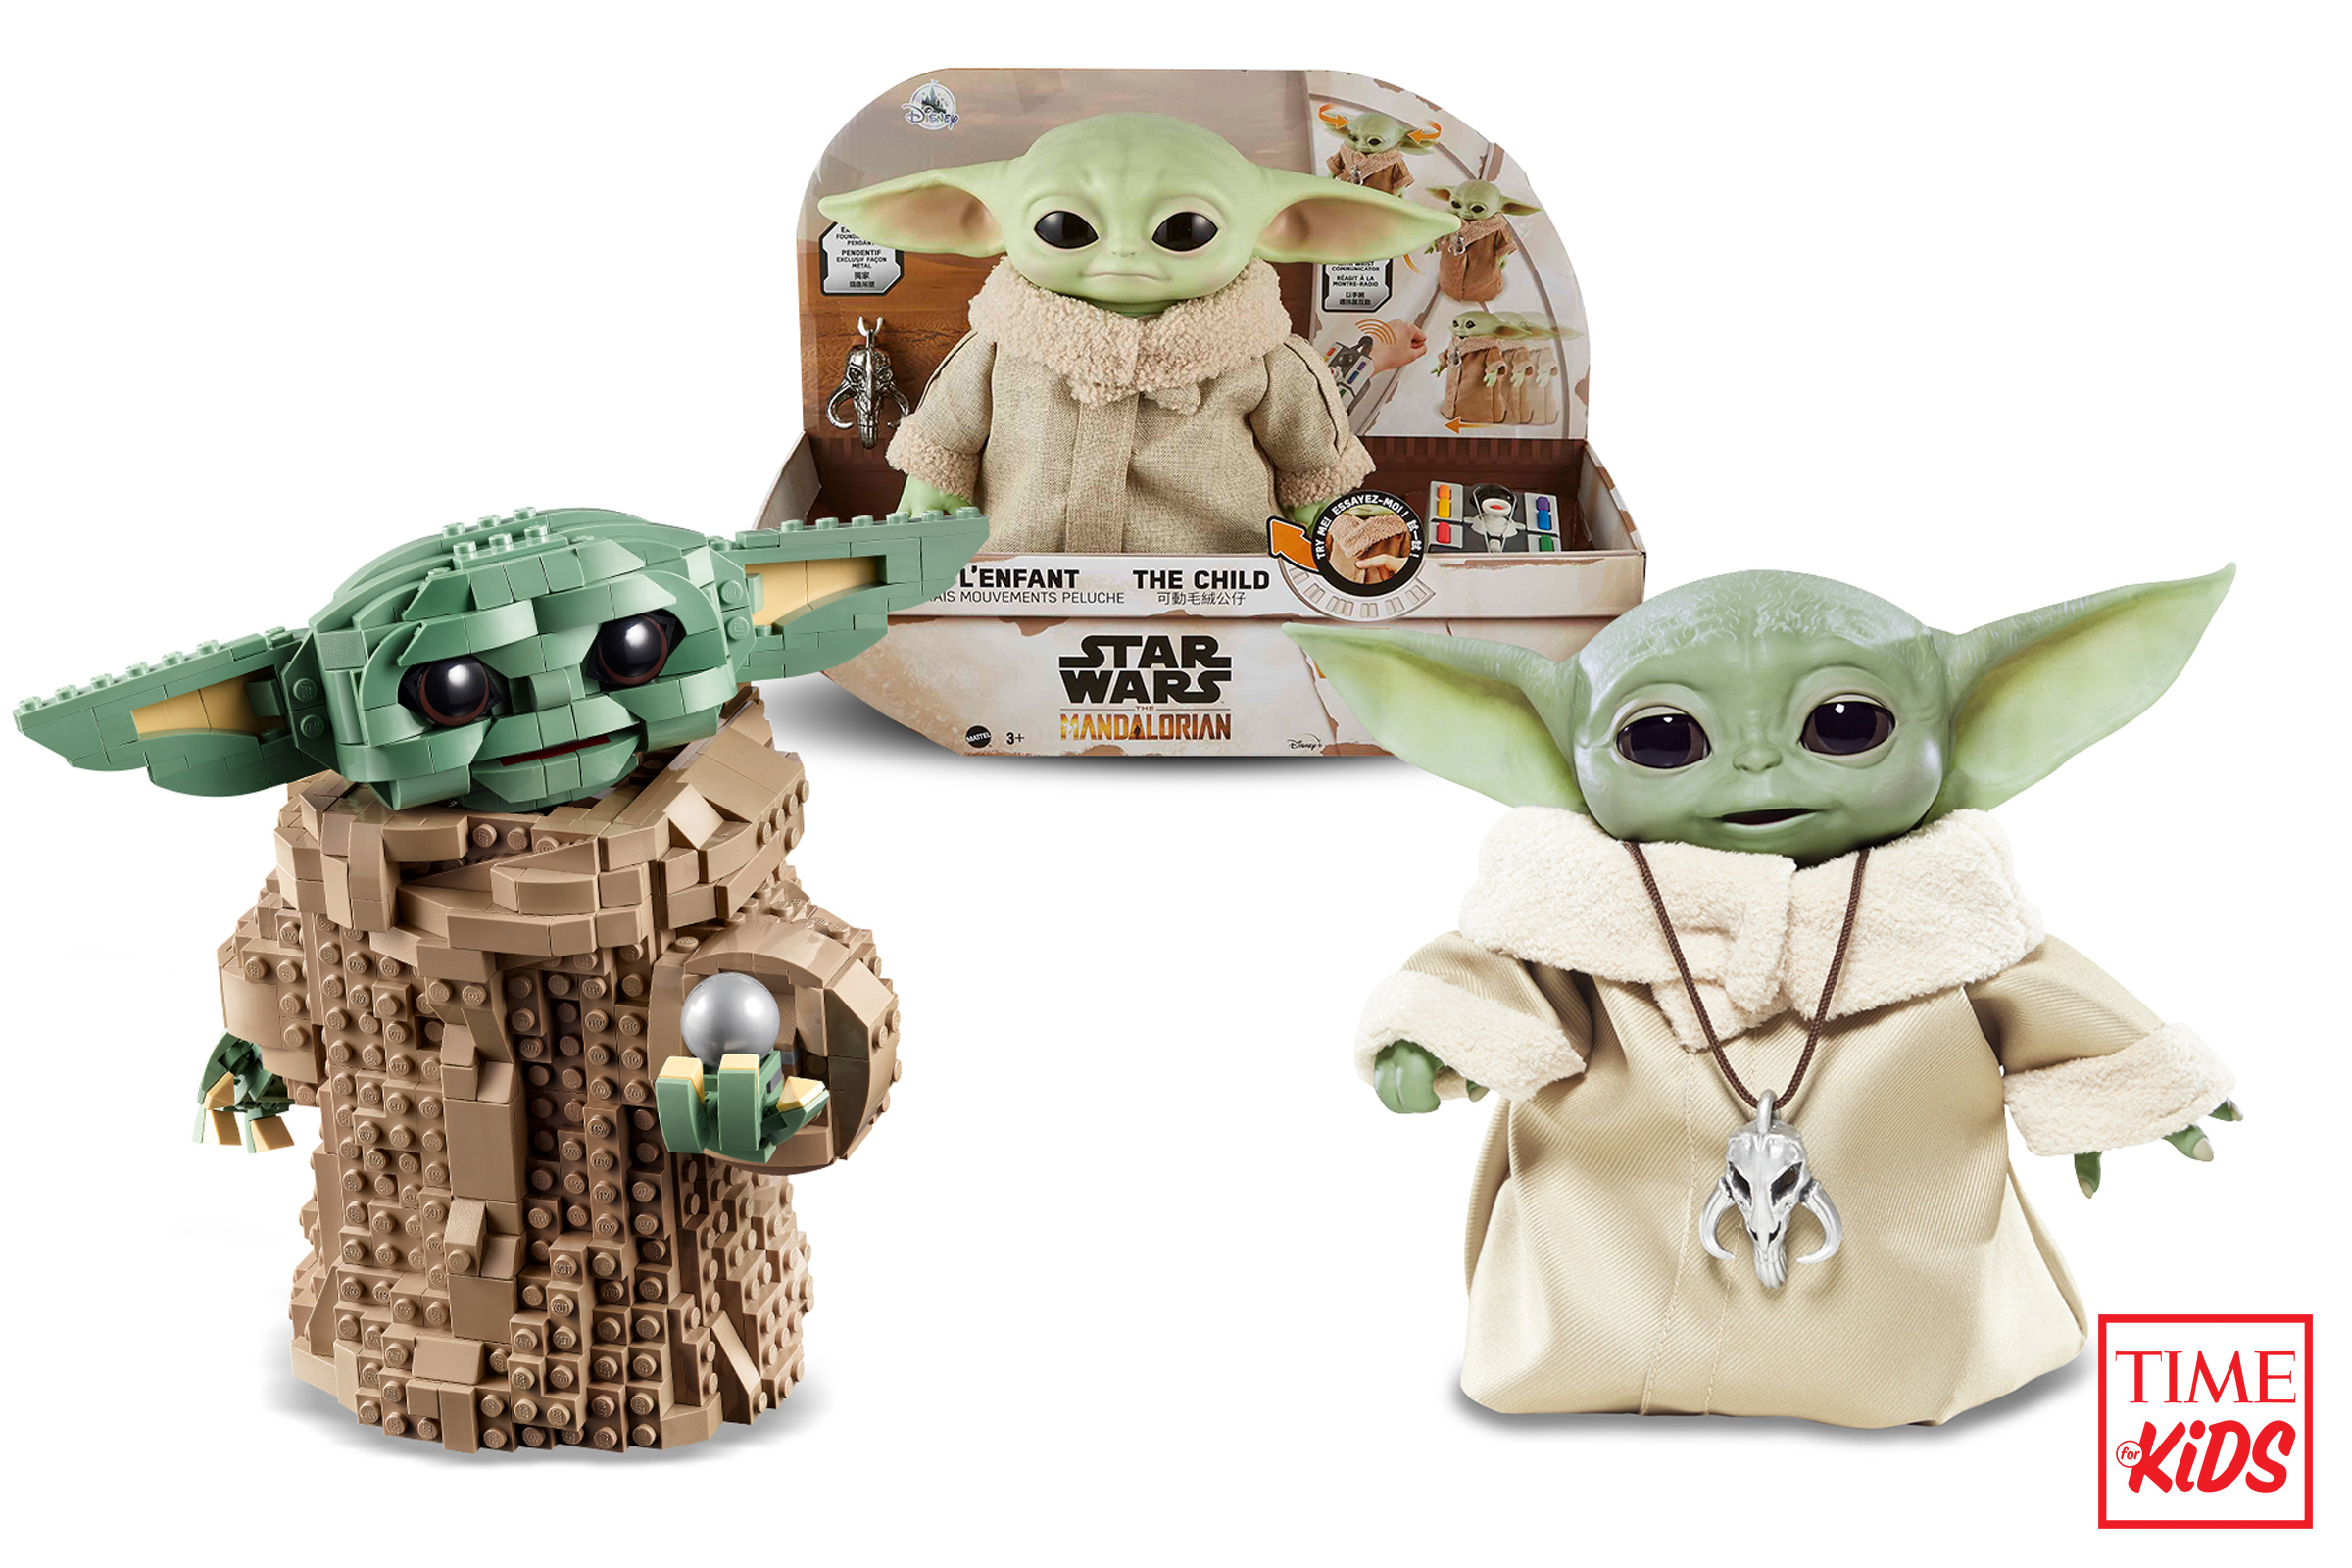 Three pictures of baby yoda for toy guide.